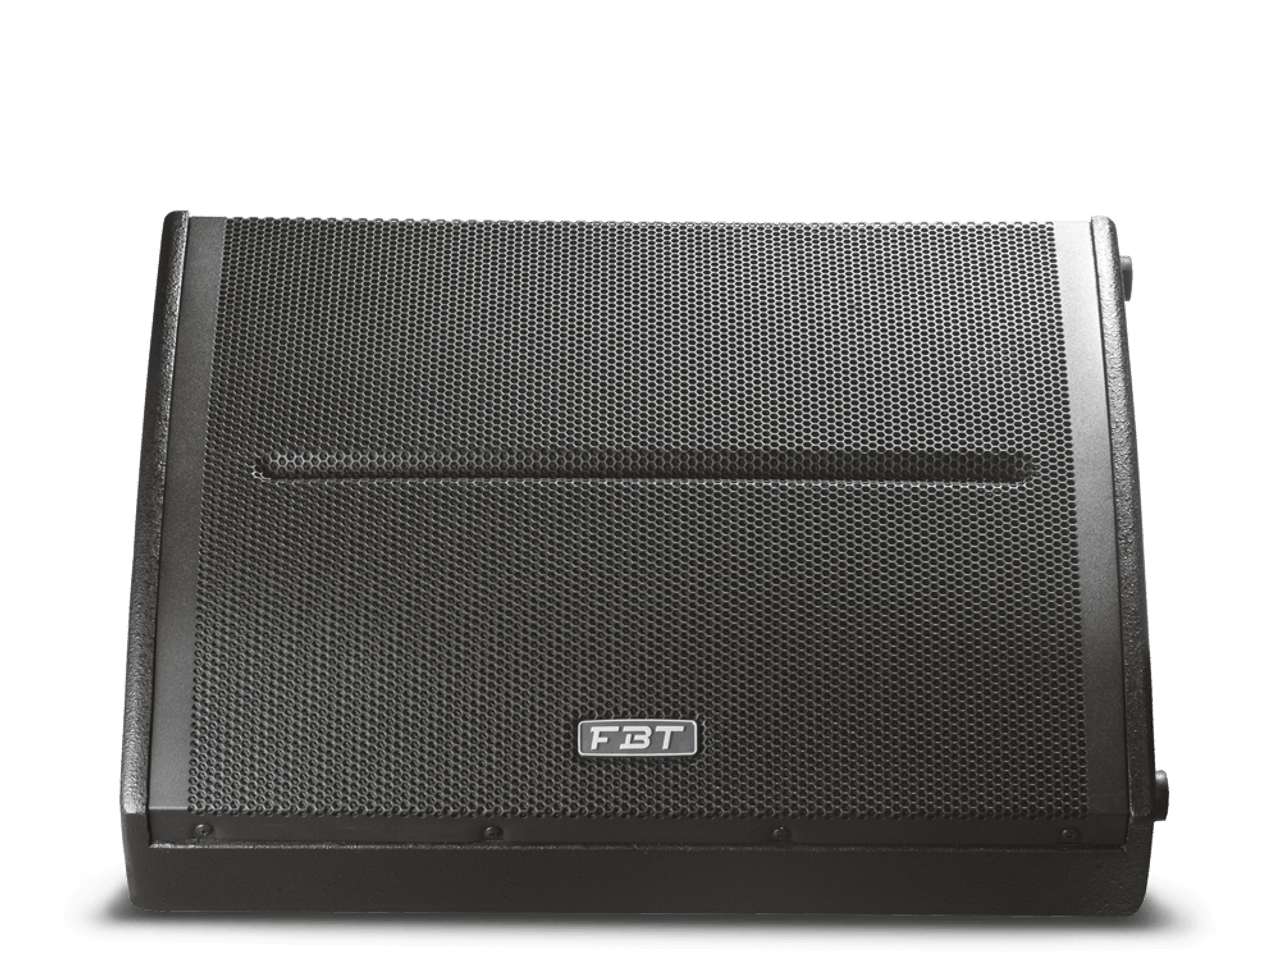 FBT X-PRO 112MA 12" Processed Active Stage Monitor with Bluetooth (Each)